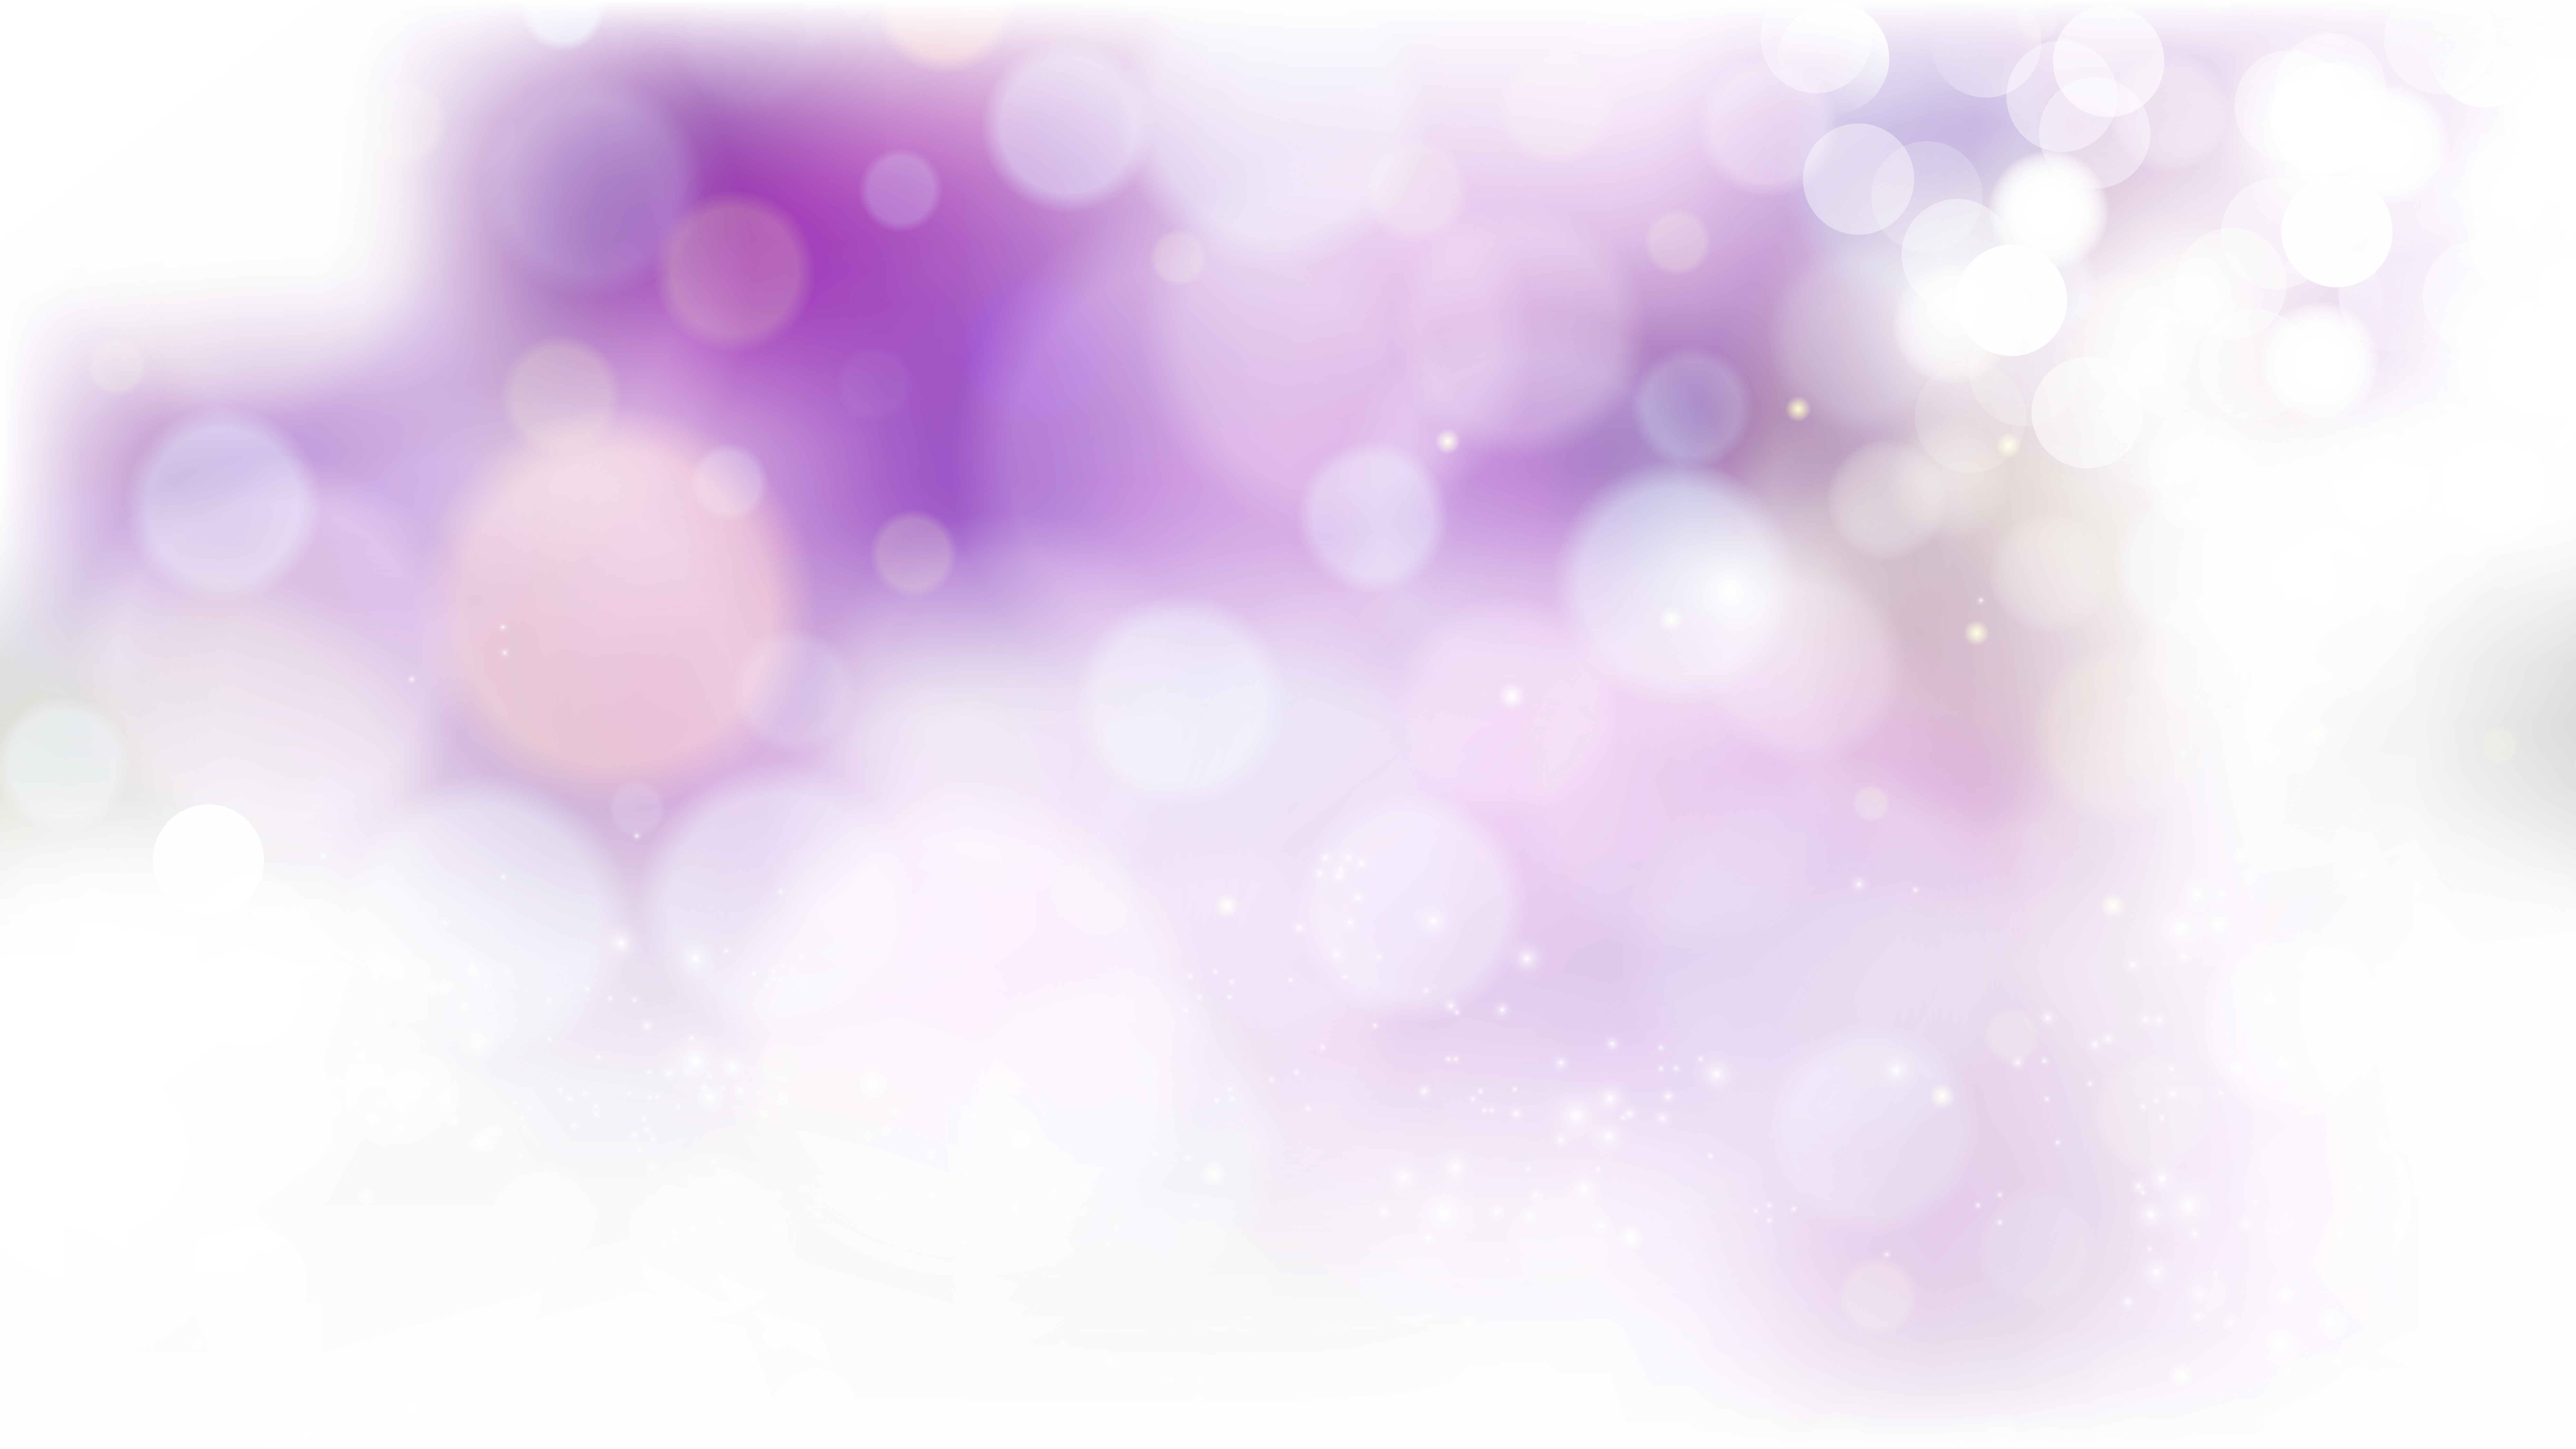 Free Abstract Purple And White Blur Lights Background Illustrator